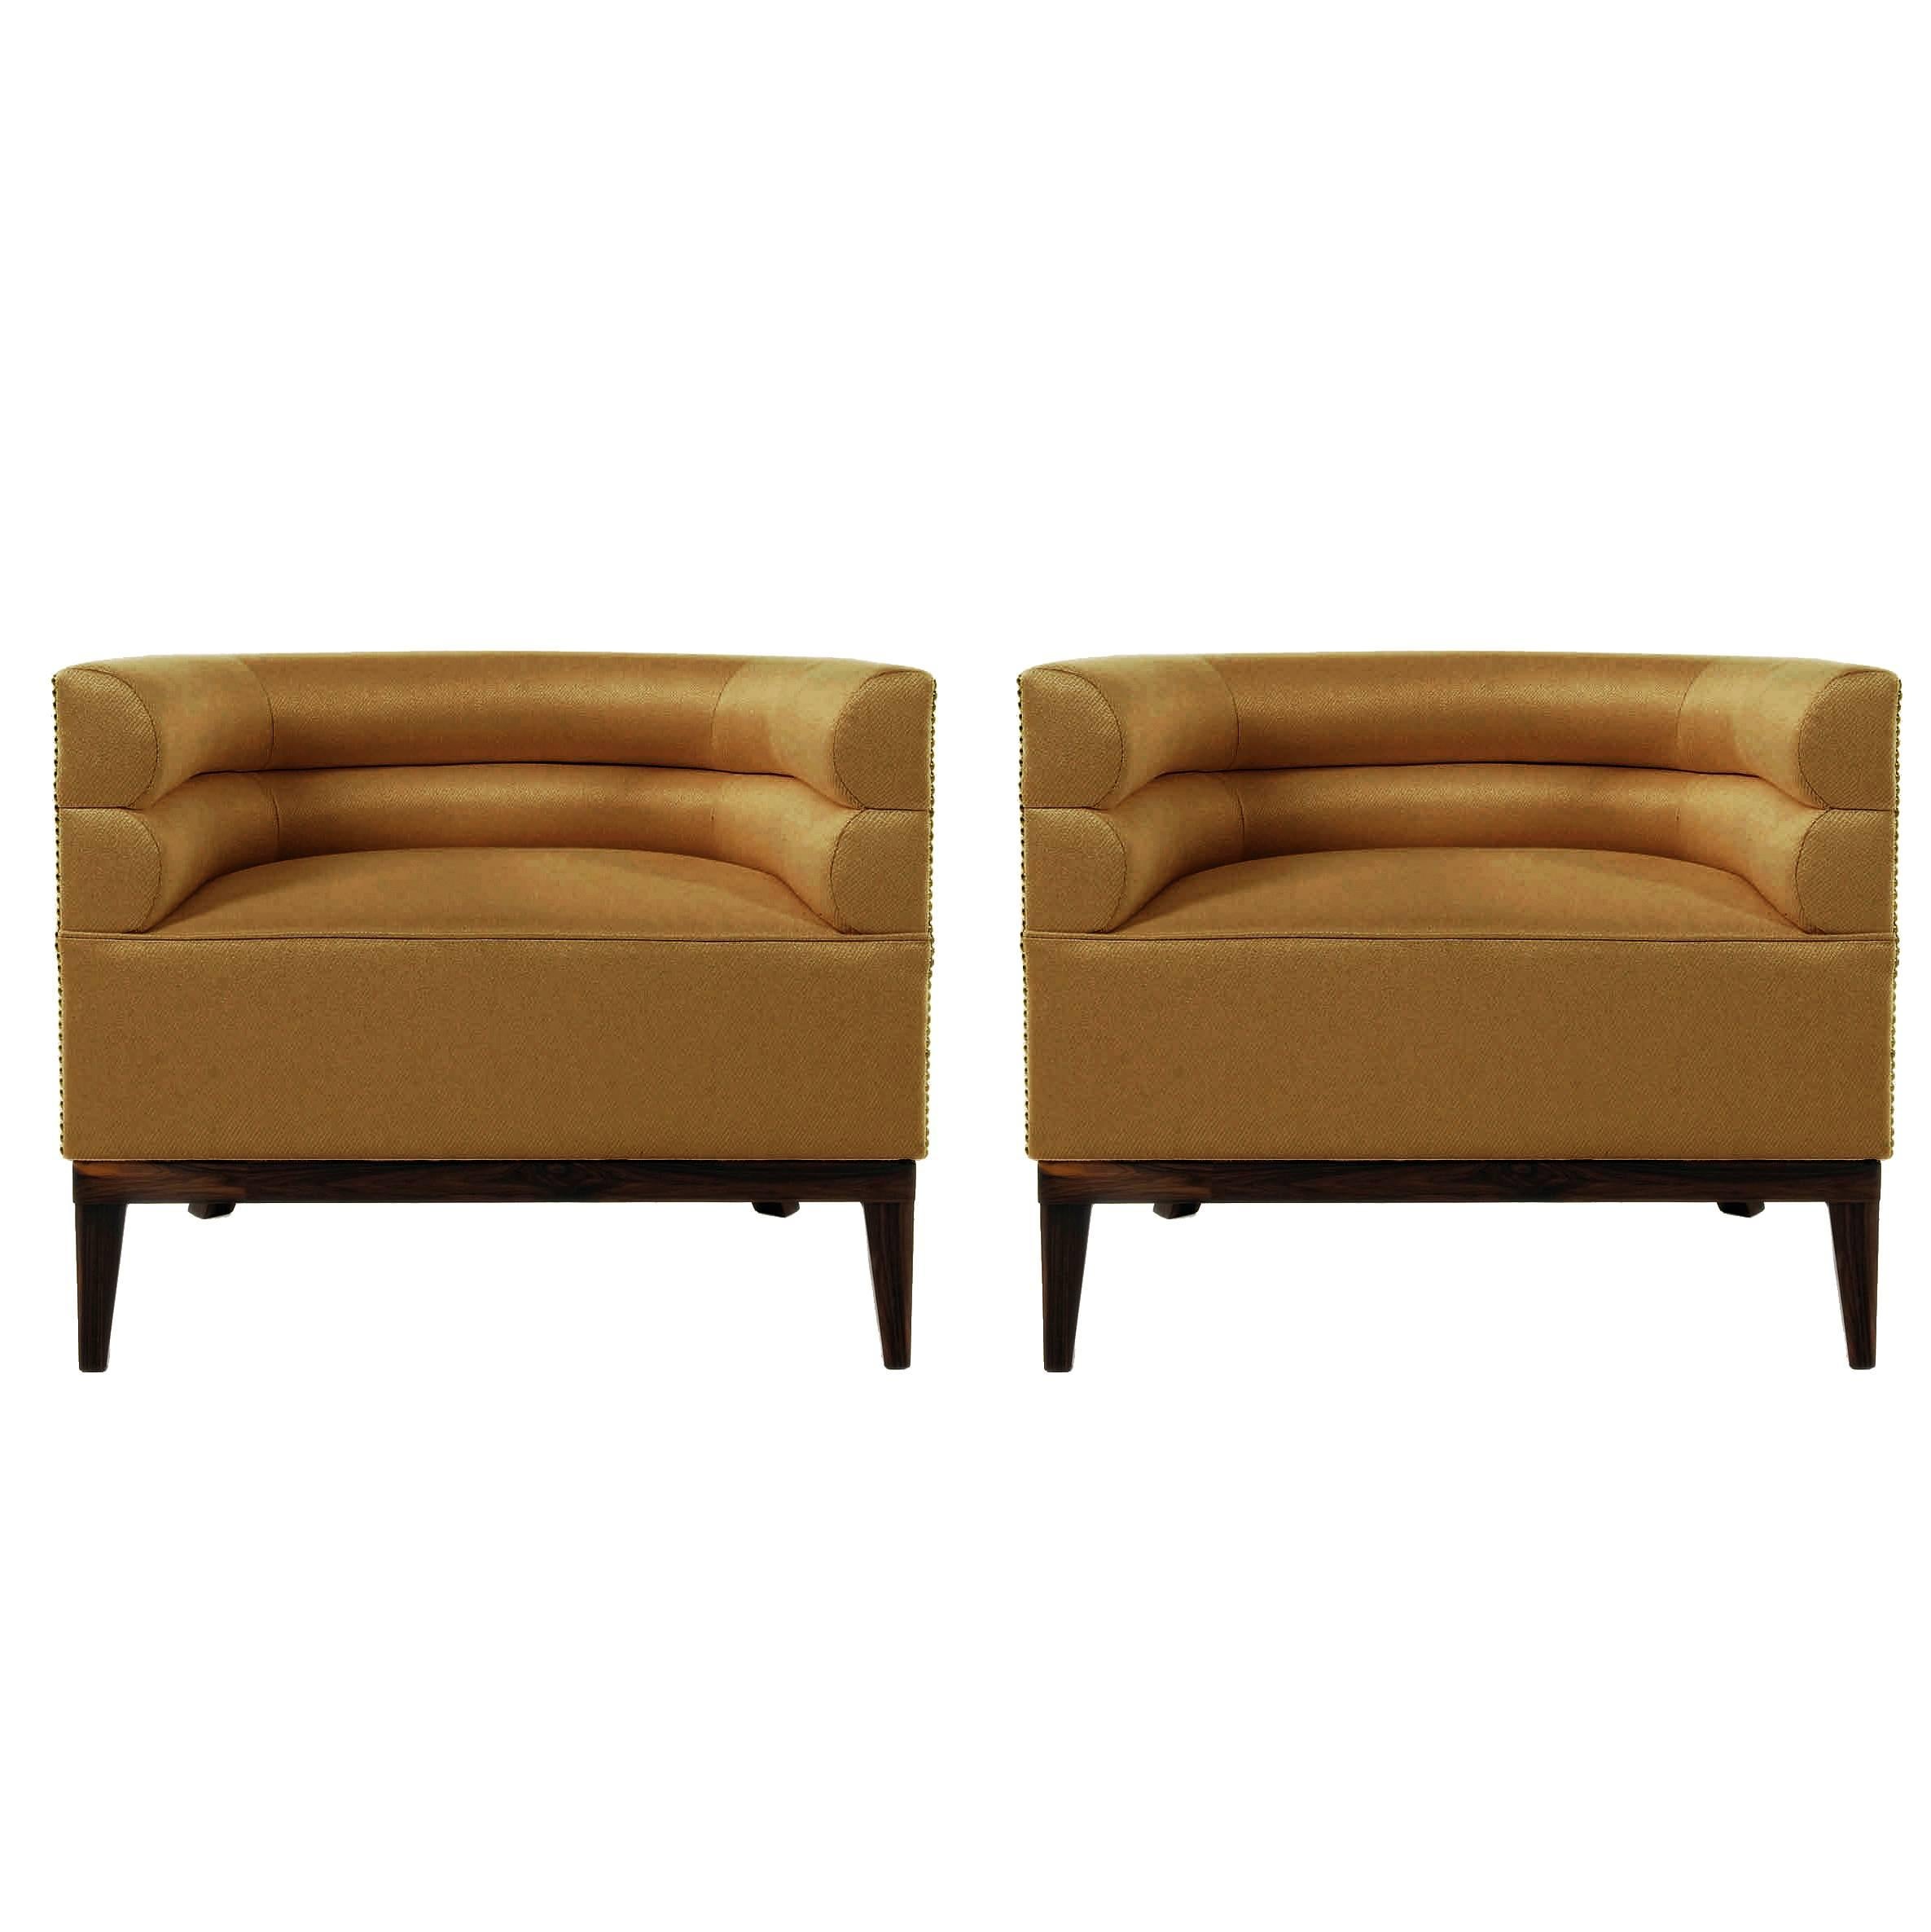 Pair of European Modern Maa Twill and Gold and Wood Armchair by Brabbu For Sale